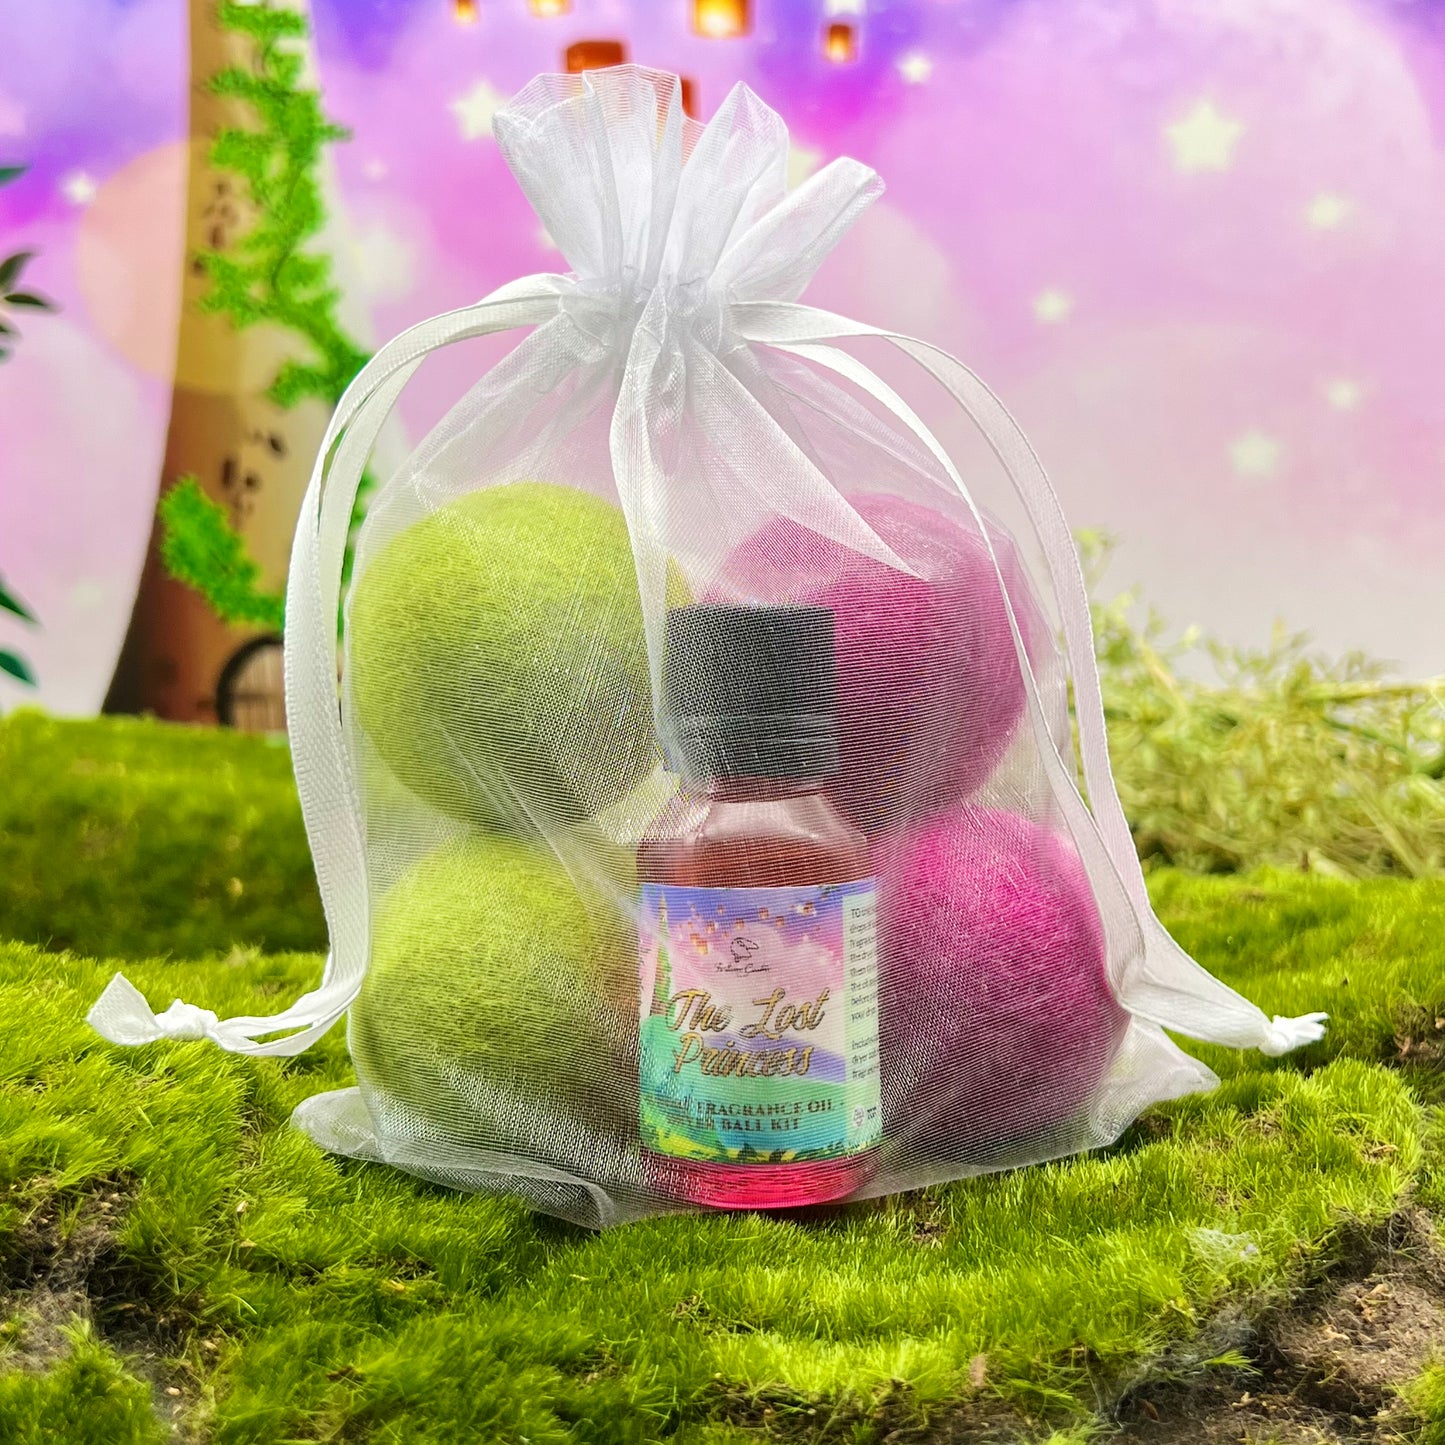 THE LOST PRINCESS Laundry Fragrance Oil Kit